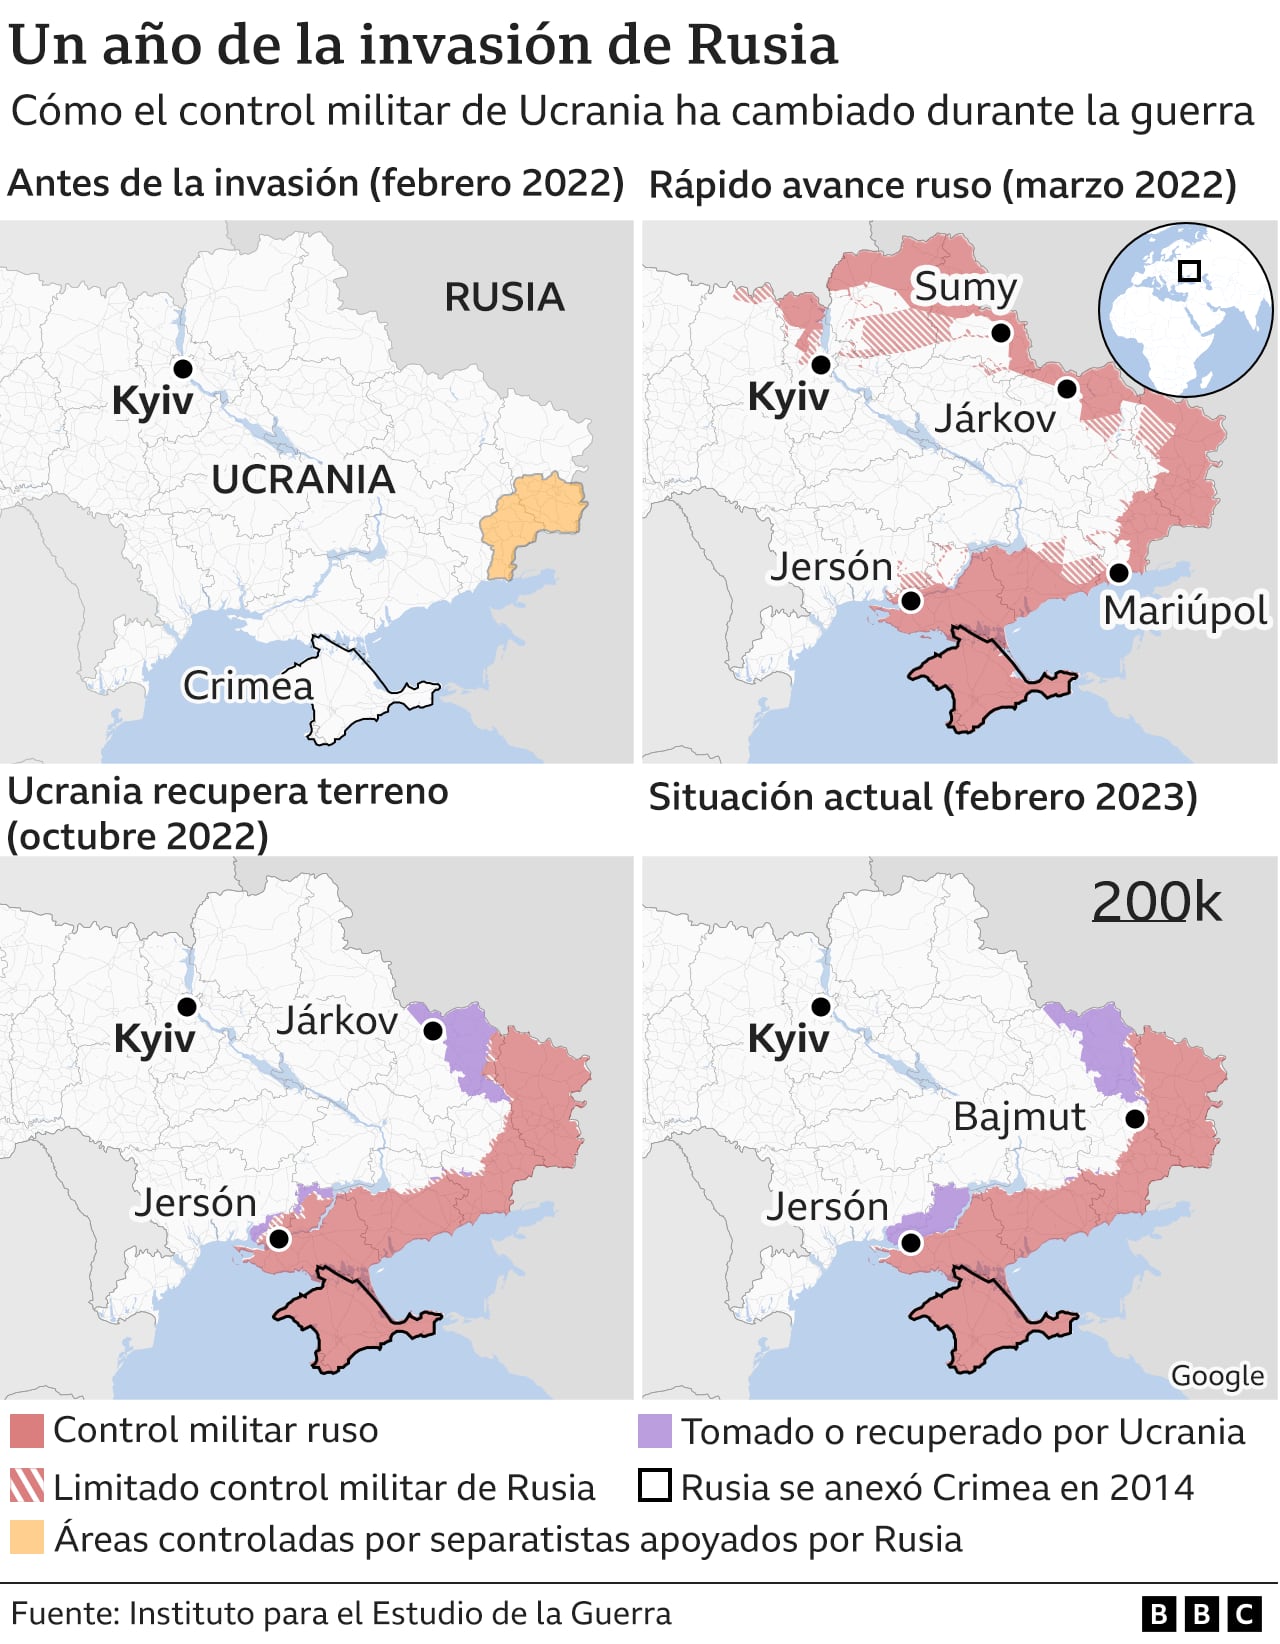 Maps of how control in Ukraine has changed during the war